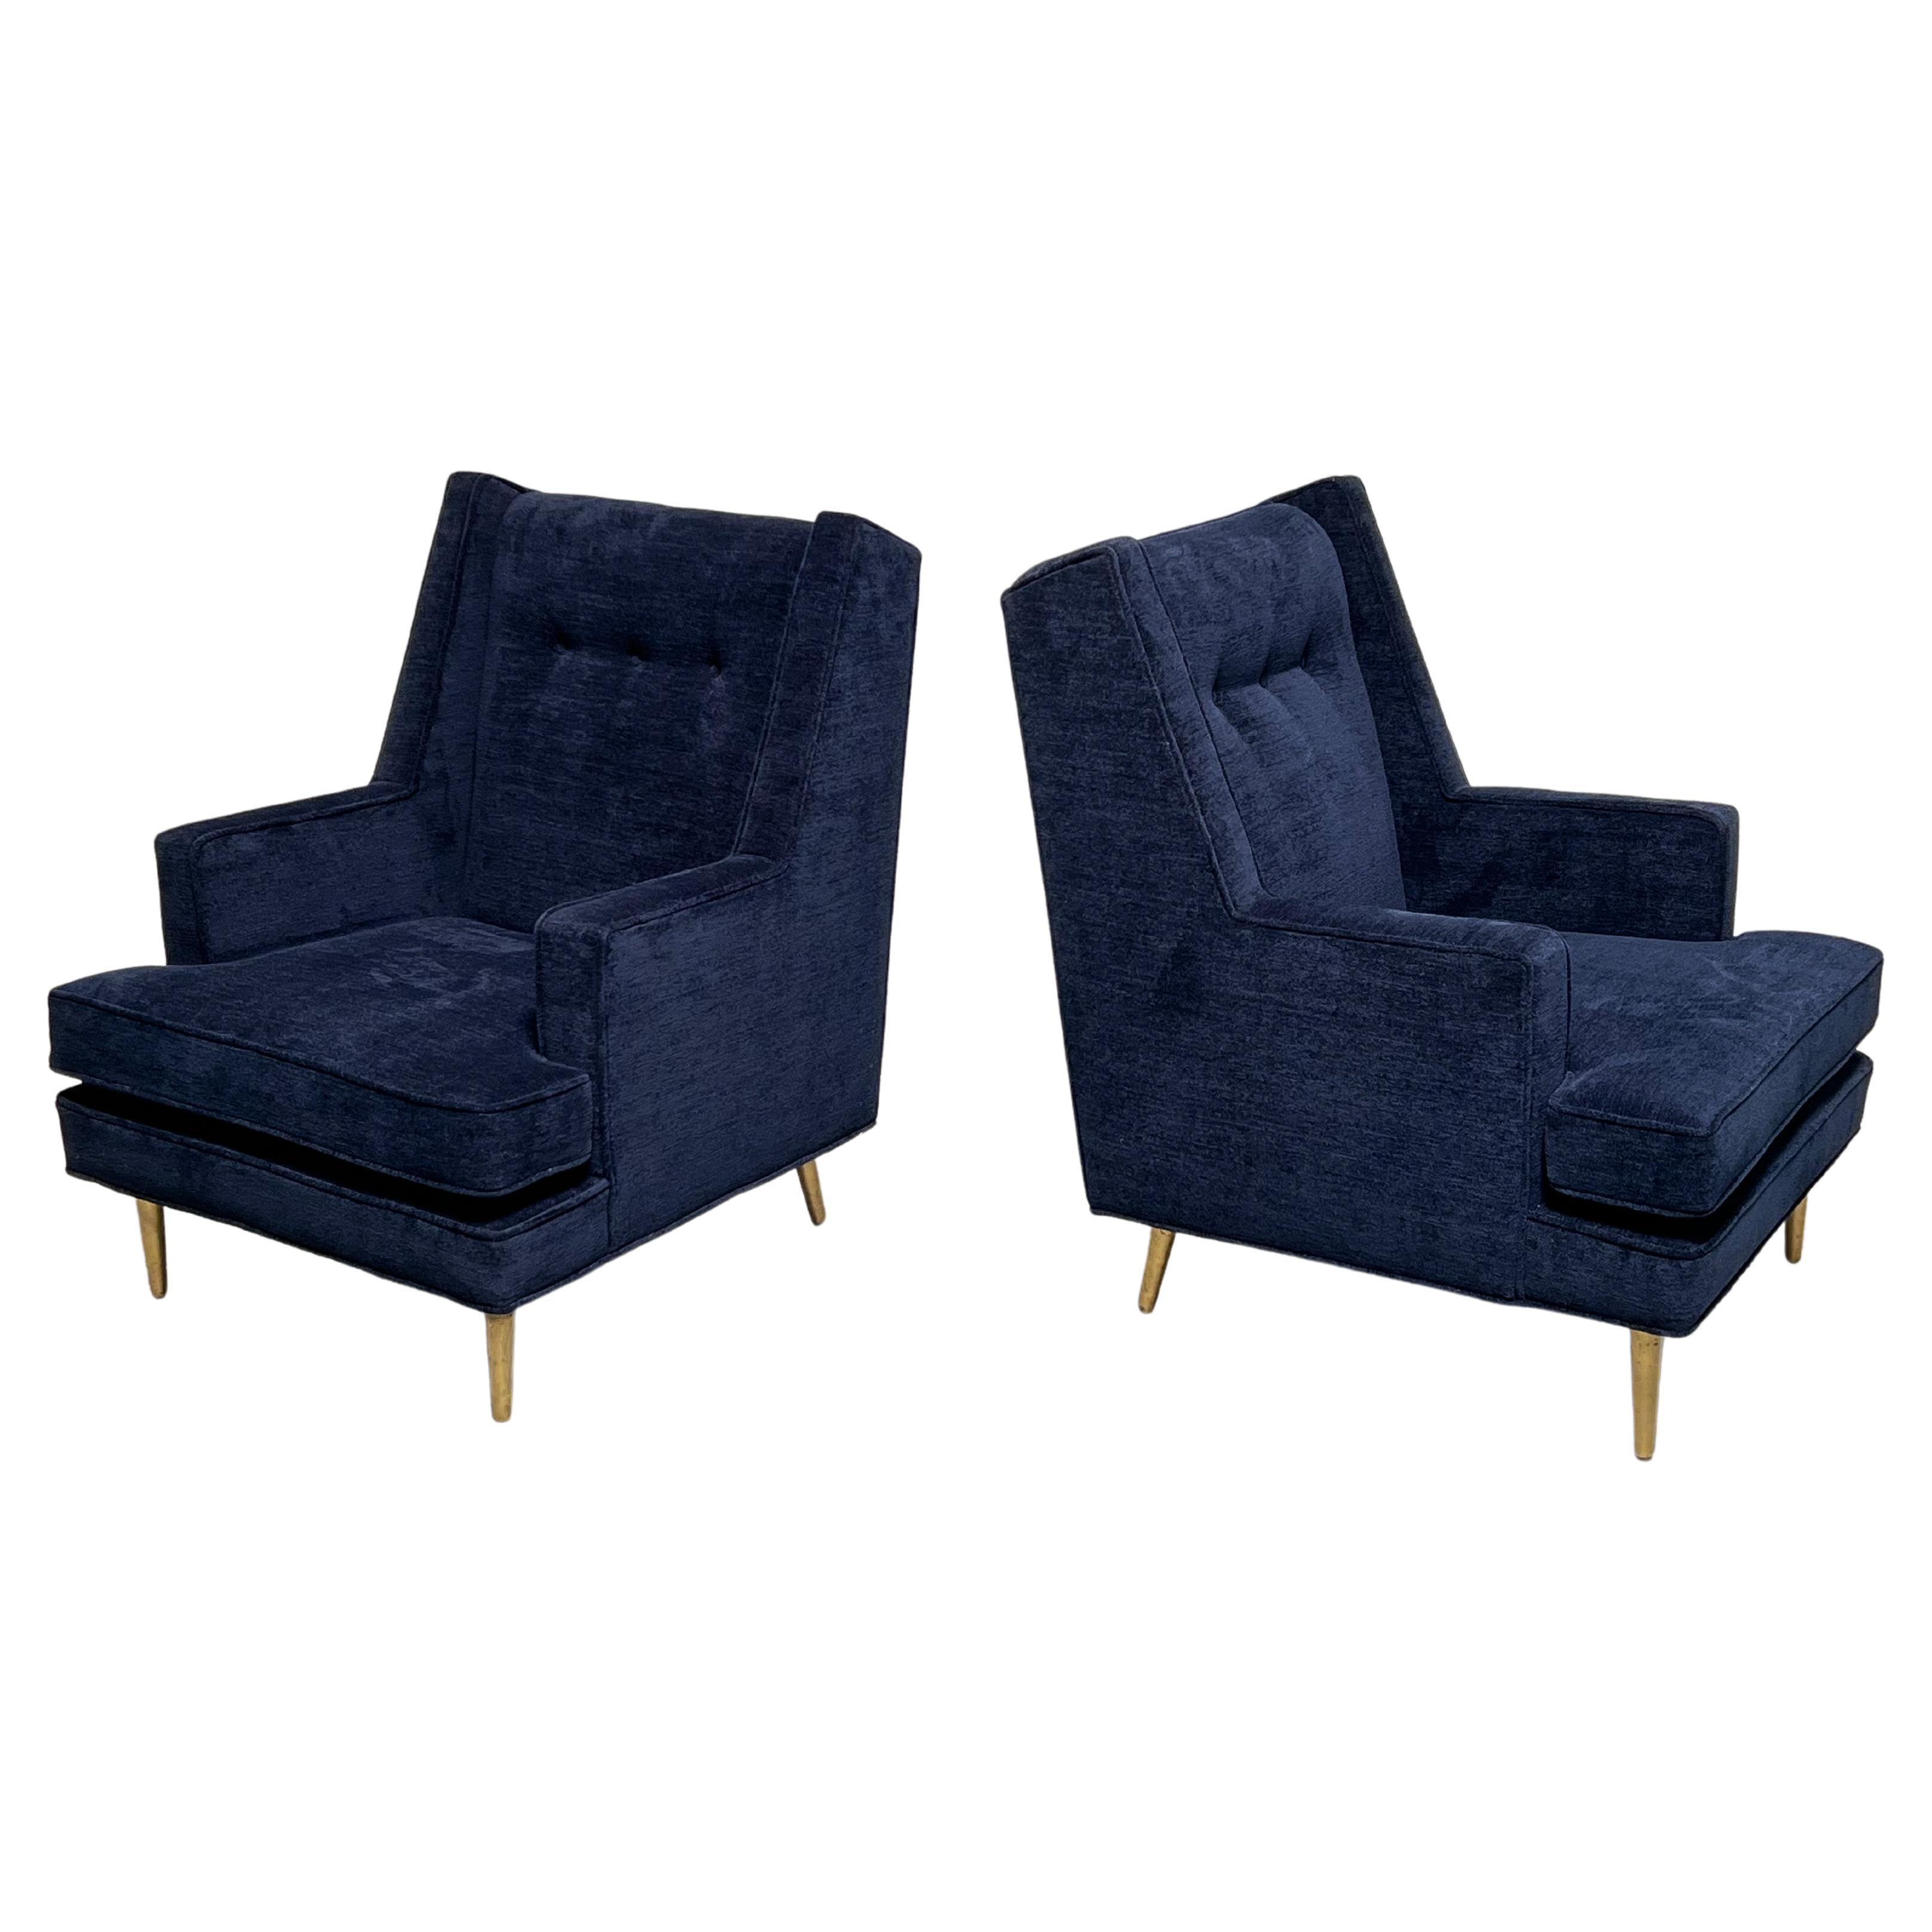 Pair of Lounge Chairs on Brass Legs by Edward Wormley for Dunbar For Sale